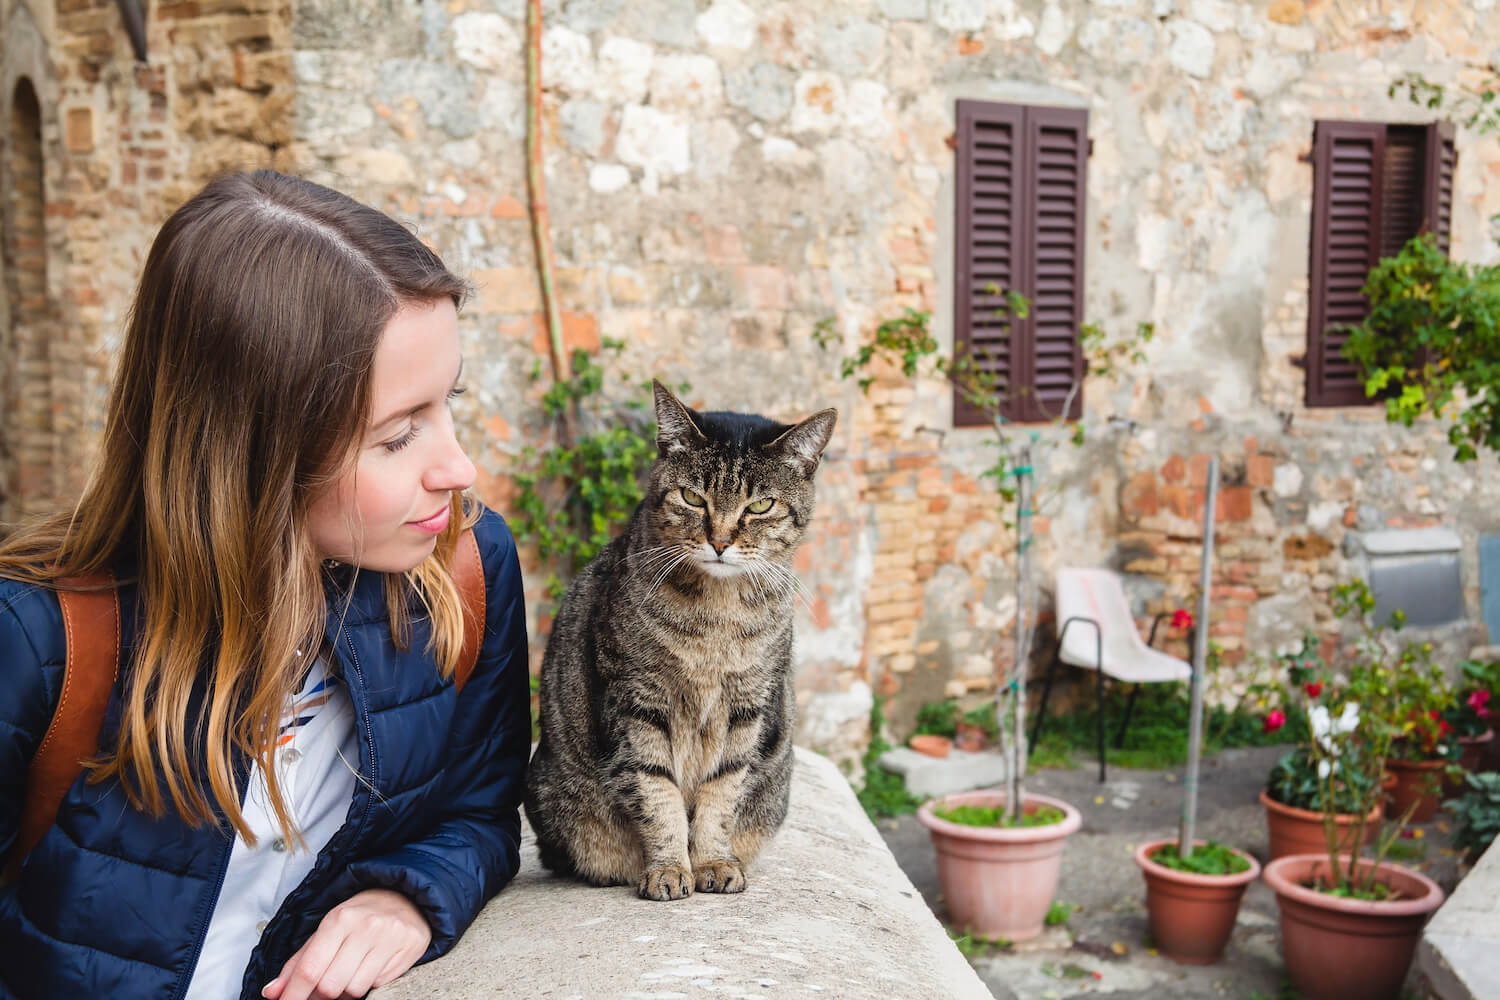 Italy, a pet lovers’ country